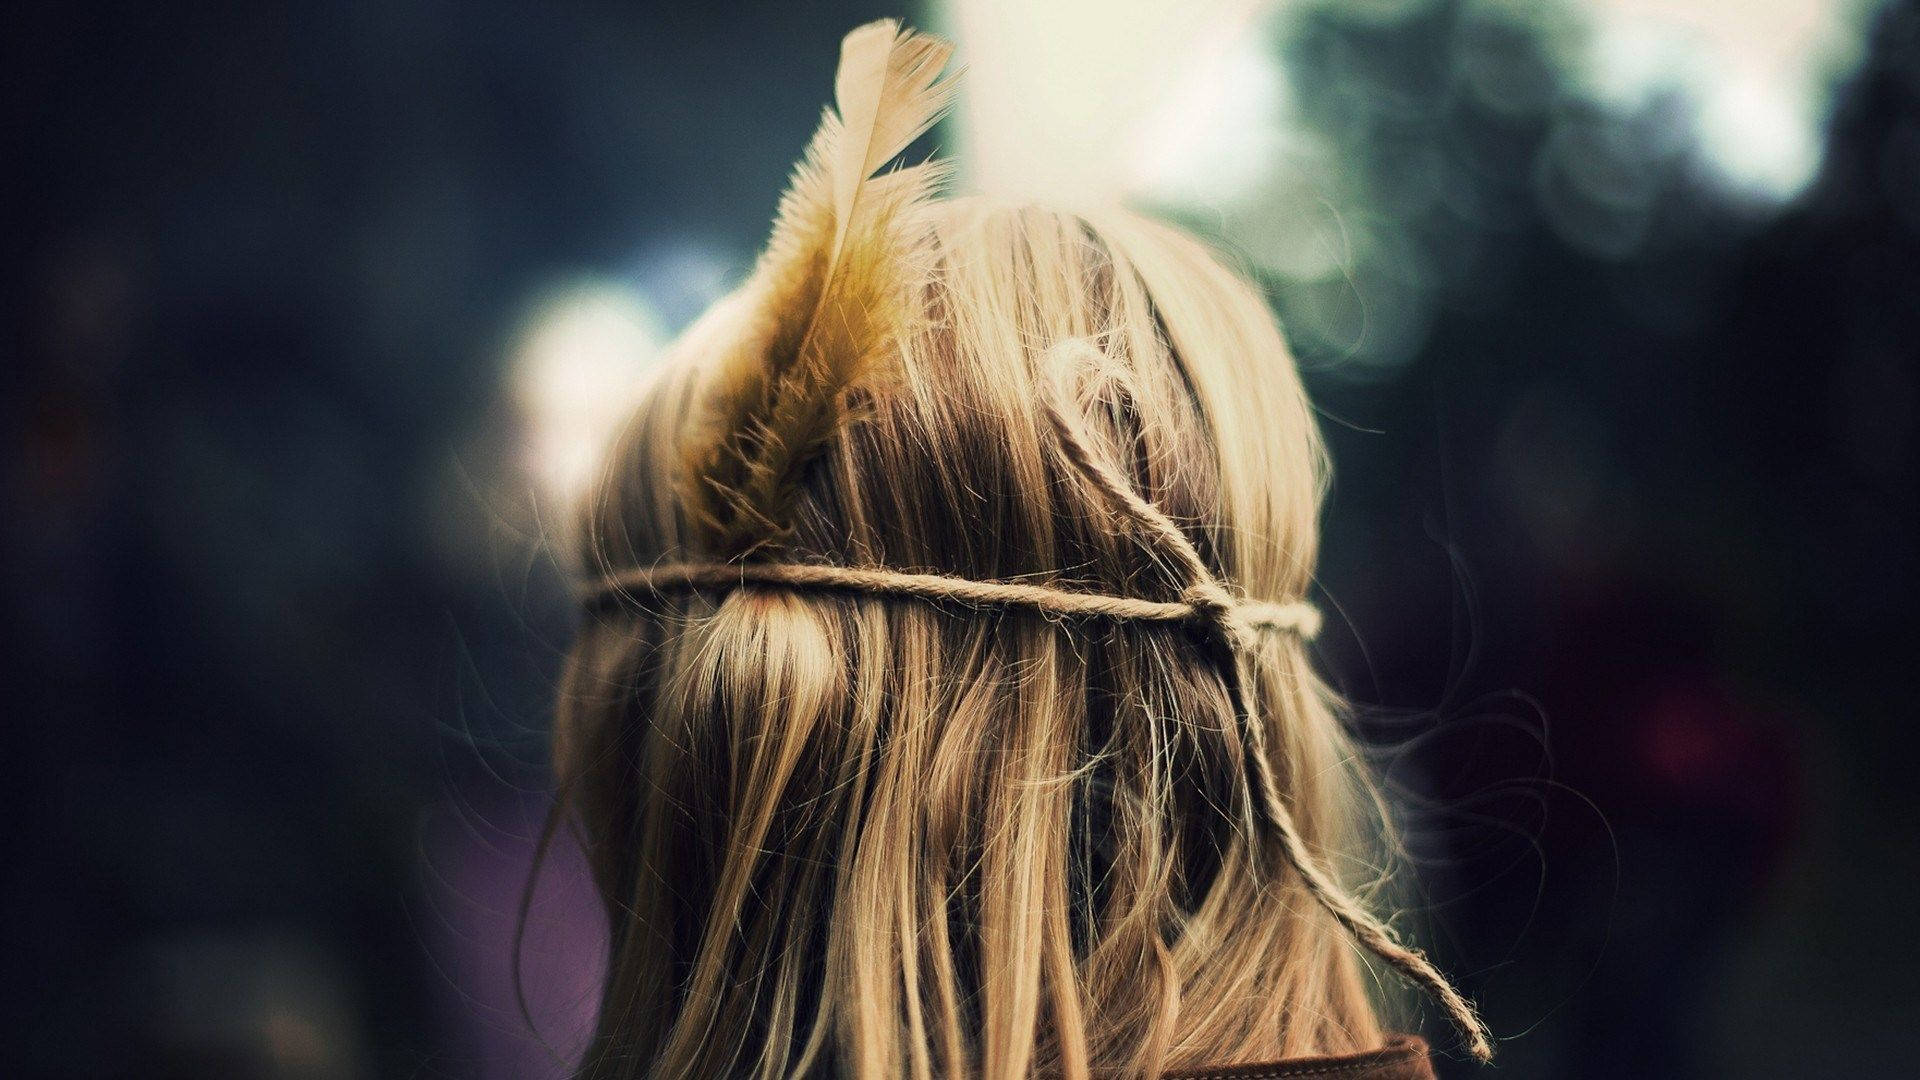 Captivating Blonde Girl with Beautiful Head Accessory Wallpaper